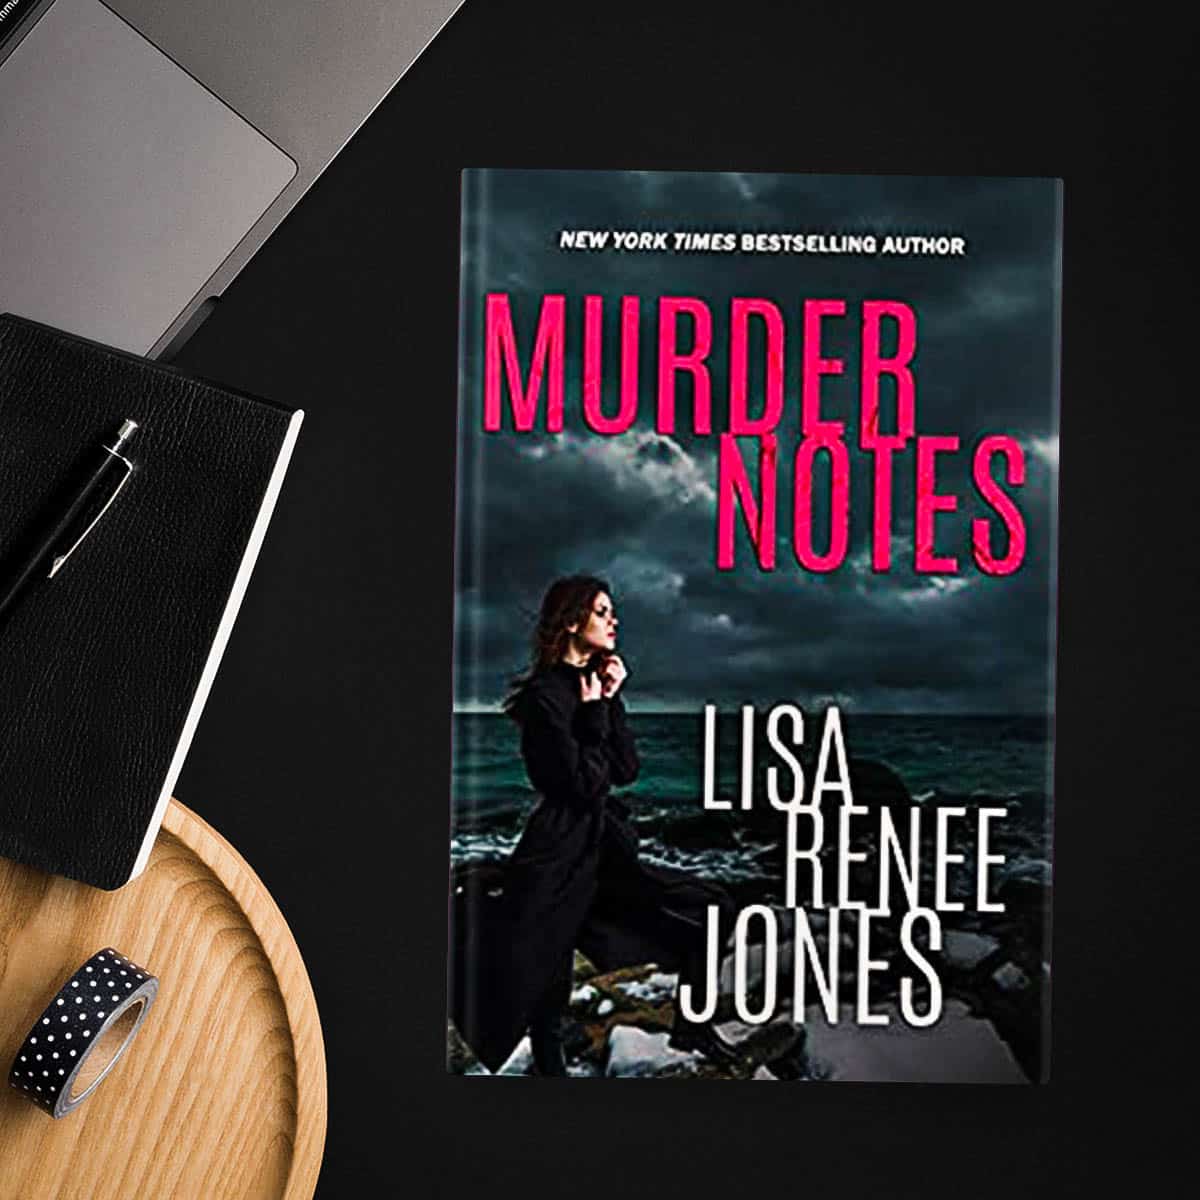 Murder Notes by Lisa Renee Jones is a heart-pounding thriller about an FBI profiler who has secrets and a past that may be tied to a new series of murders